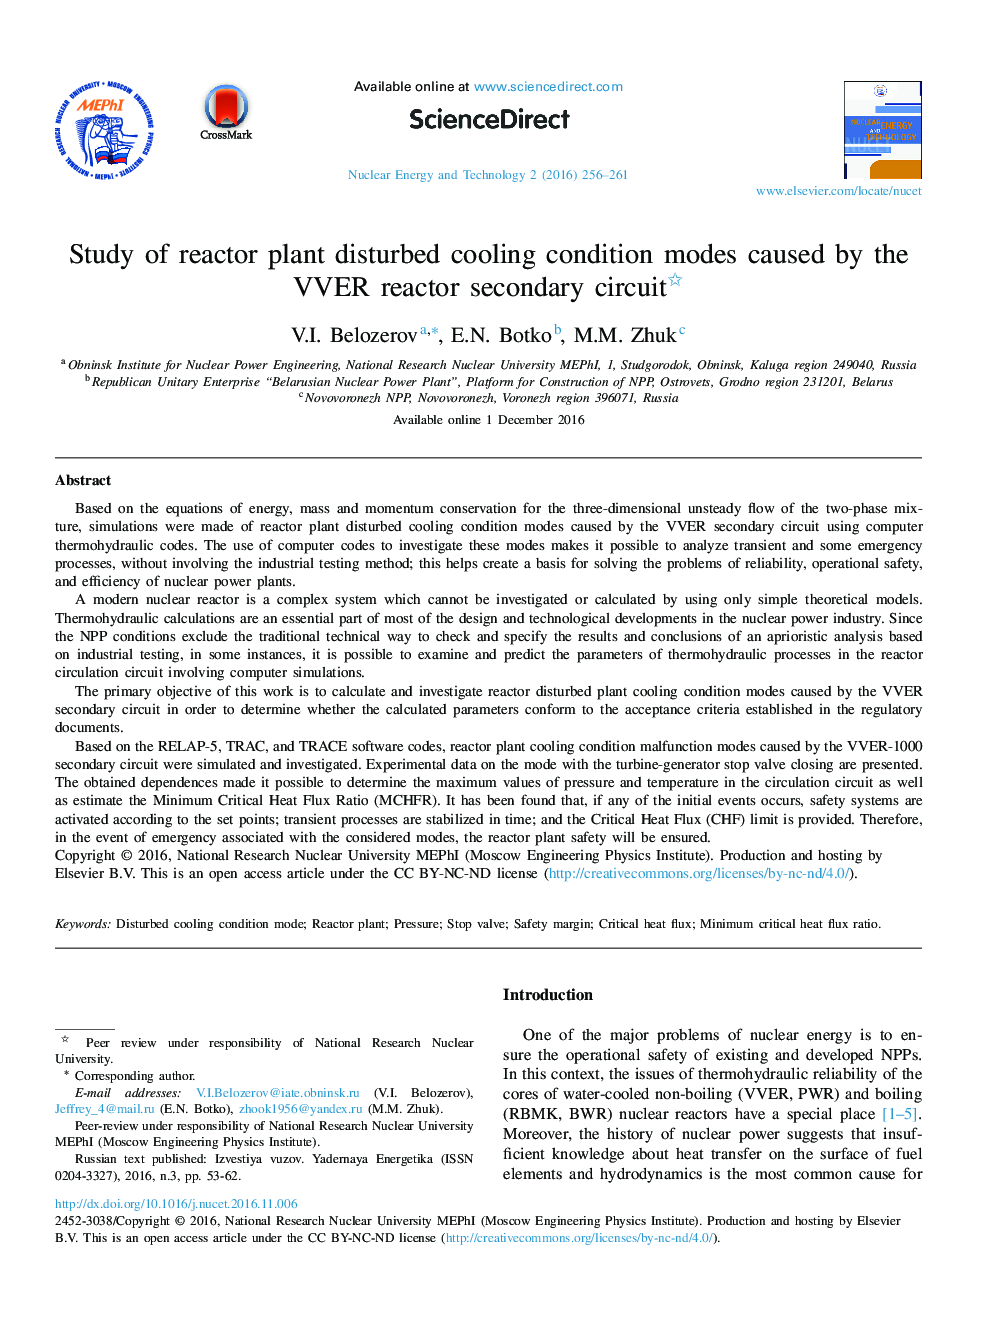 Study of reactor plant disturbed cooling condition modes caused by the VVER reactor secondary circuit